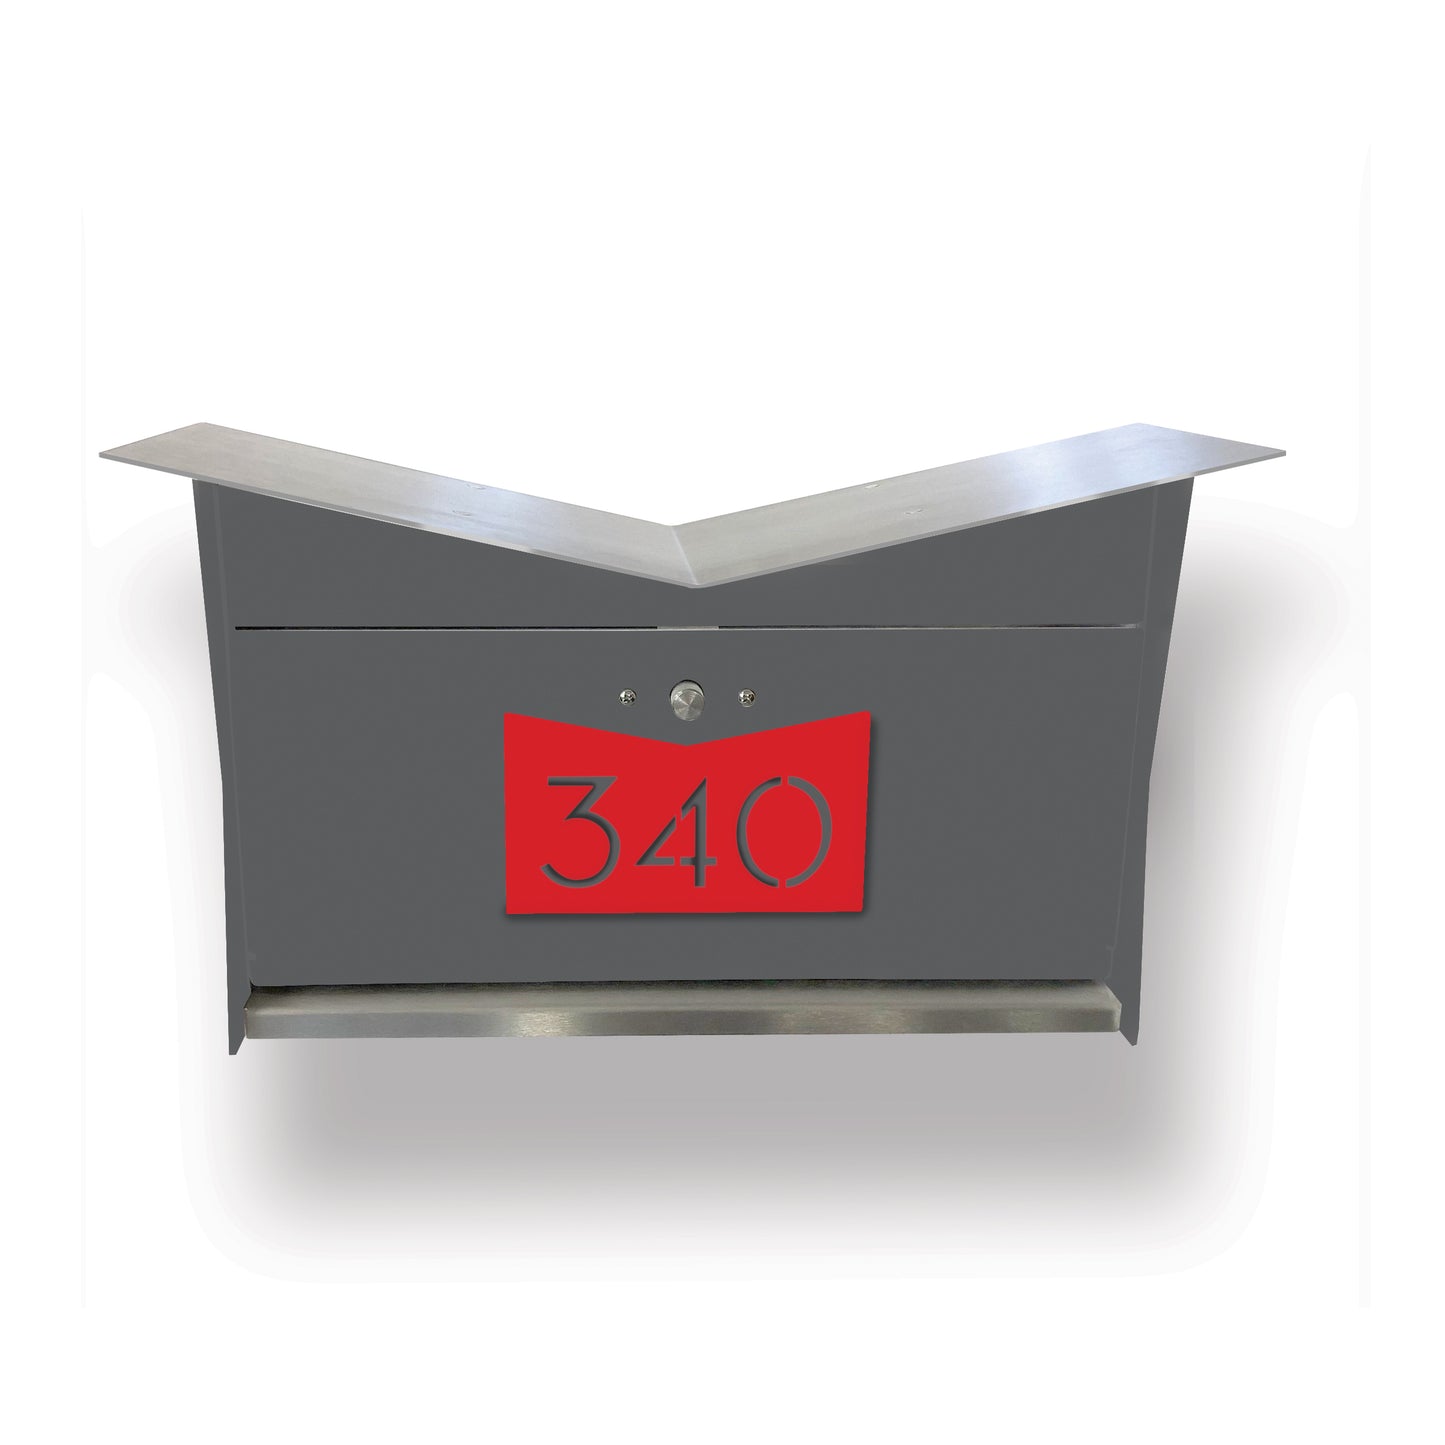 Wall Mount Mailbox | ButterFly Box in designer gray and firecracker red